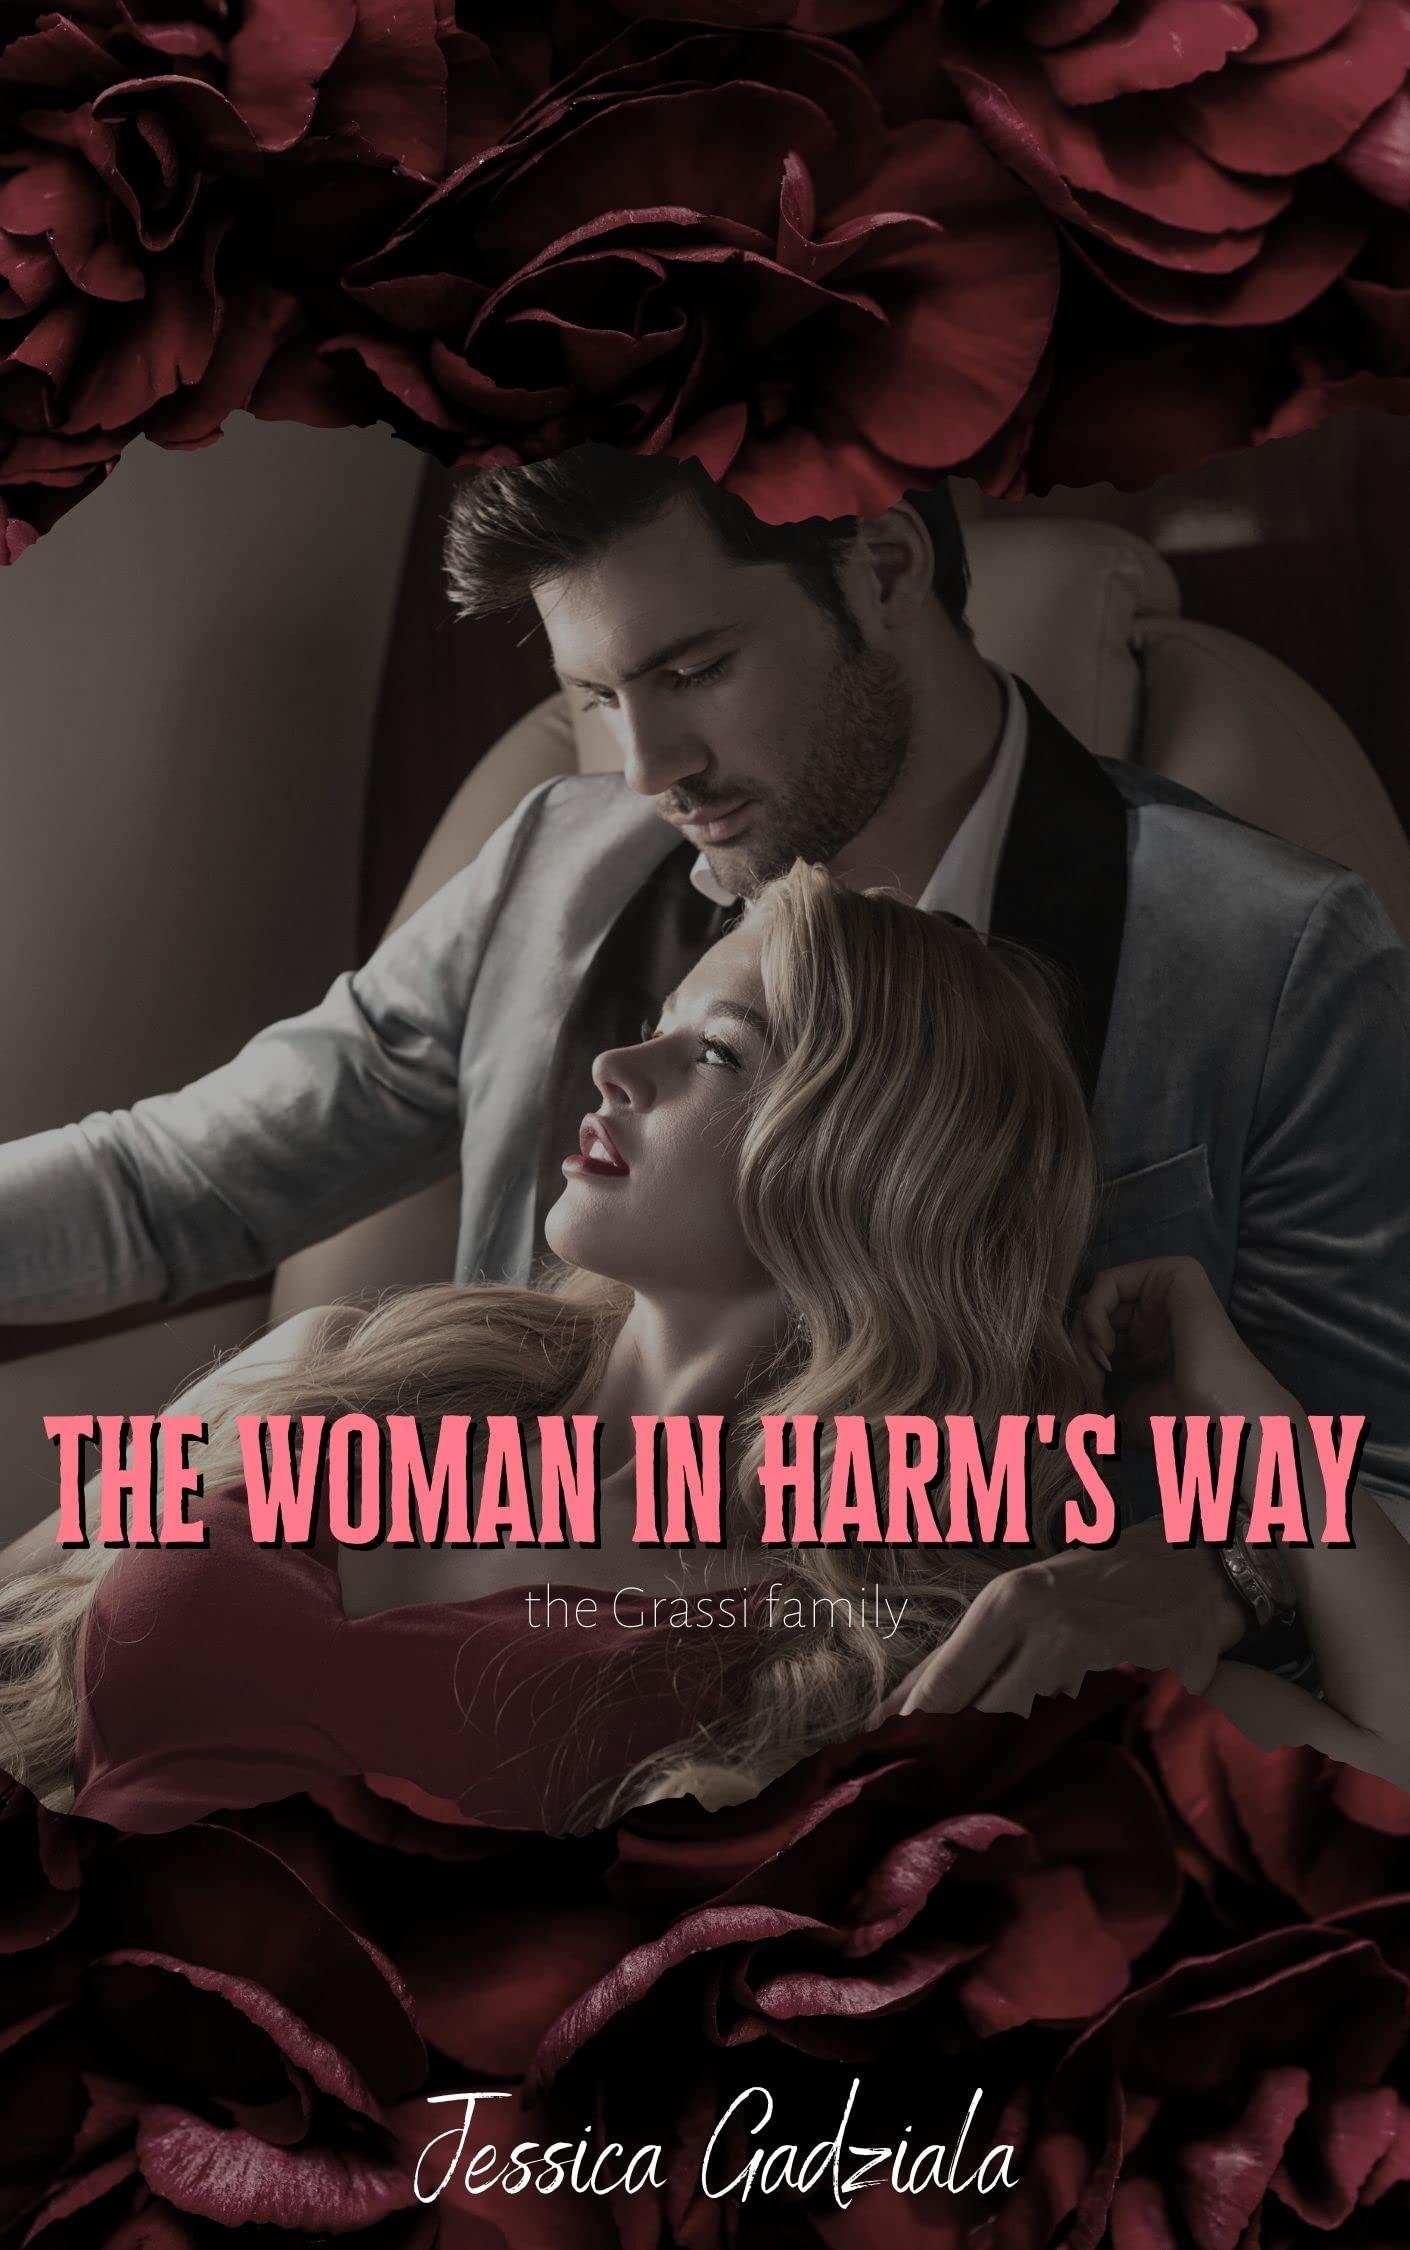 The Woman in Harm's Way